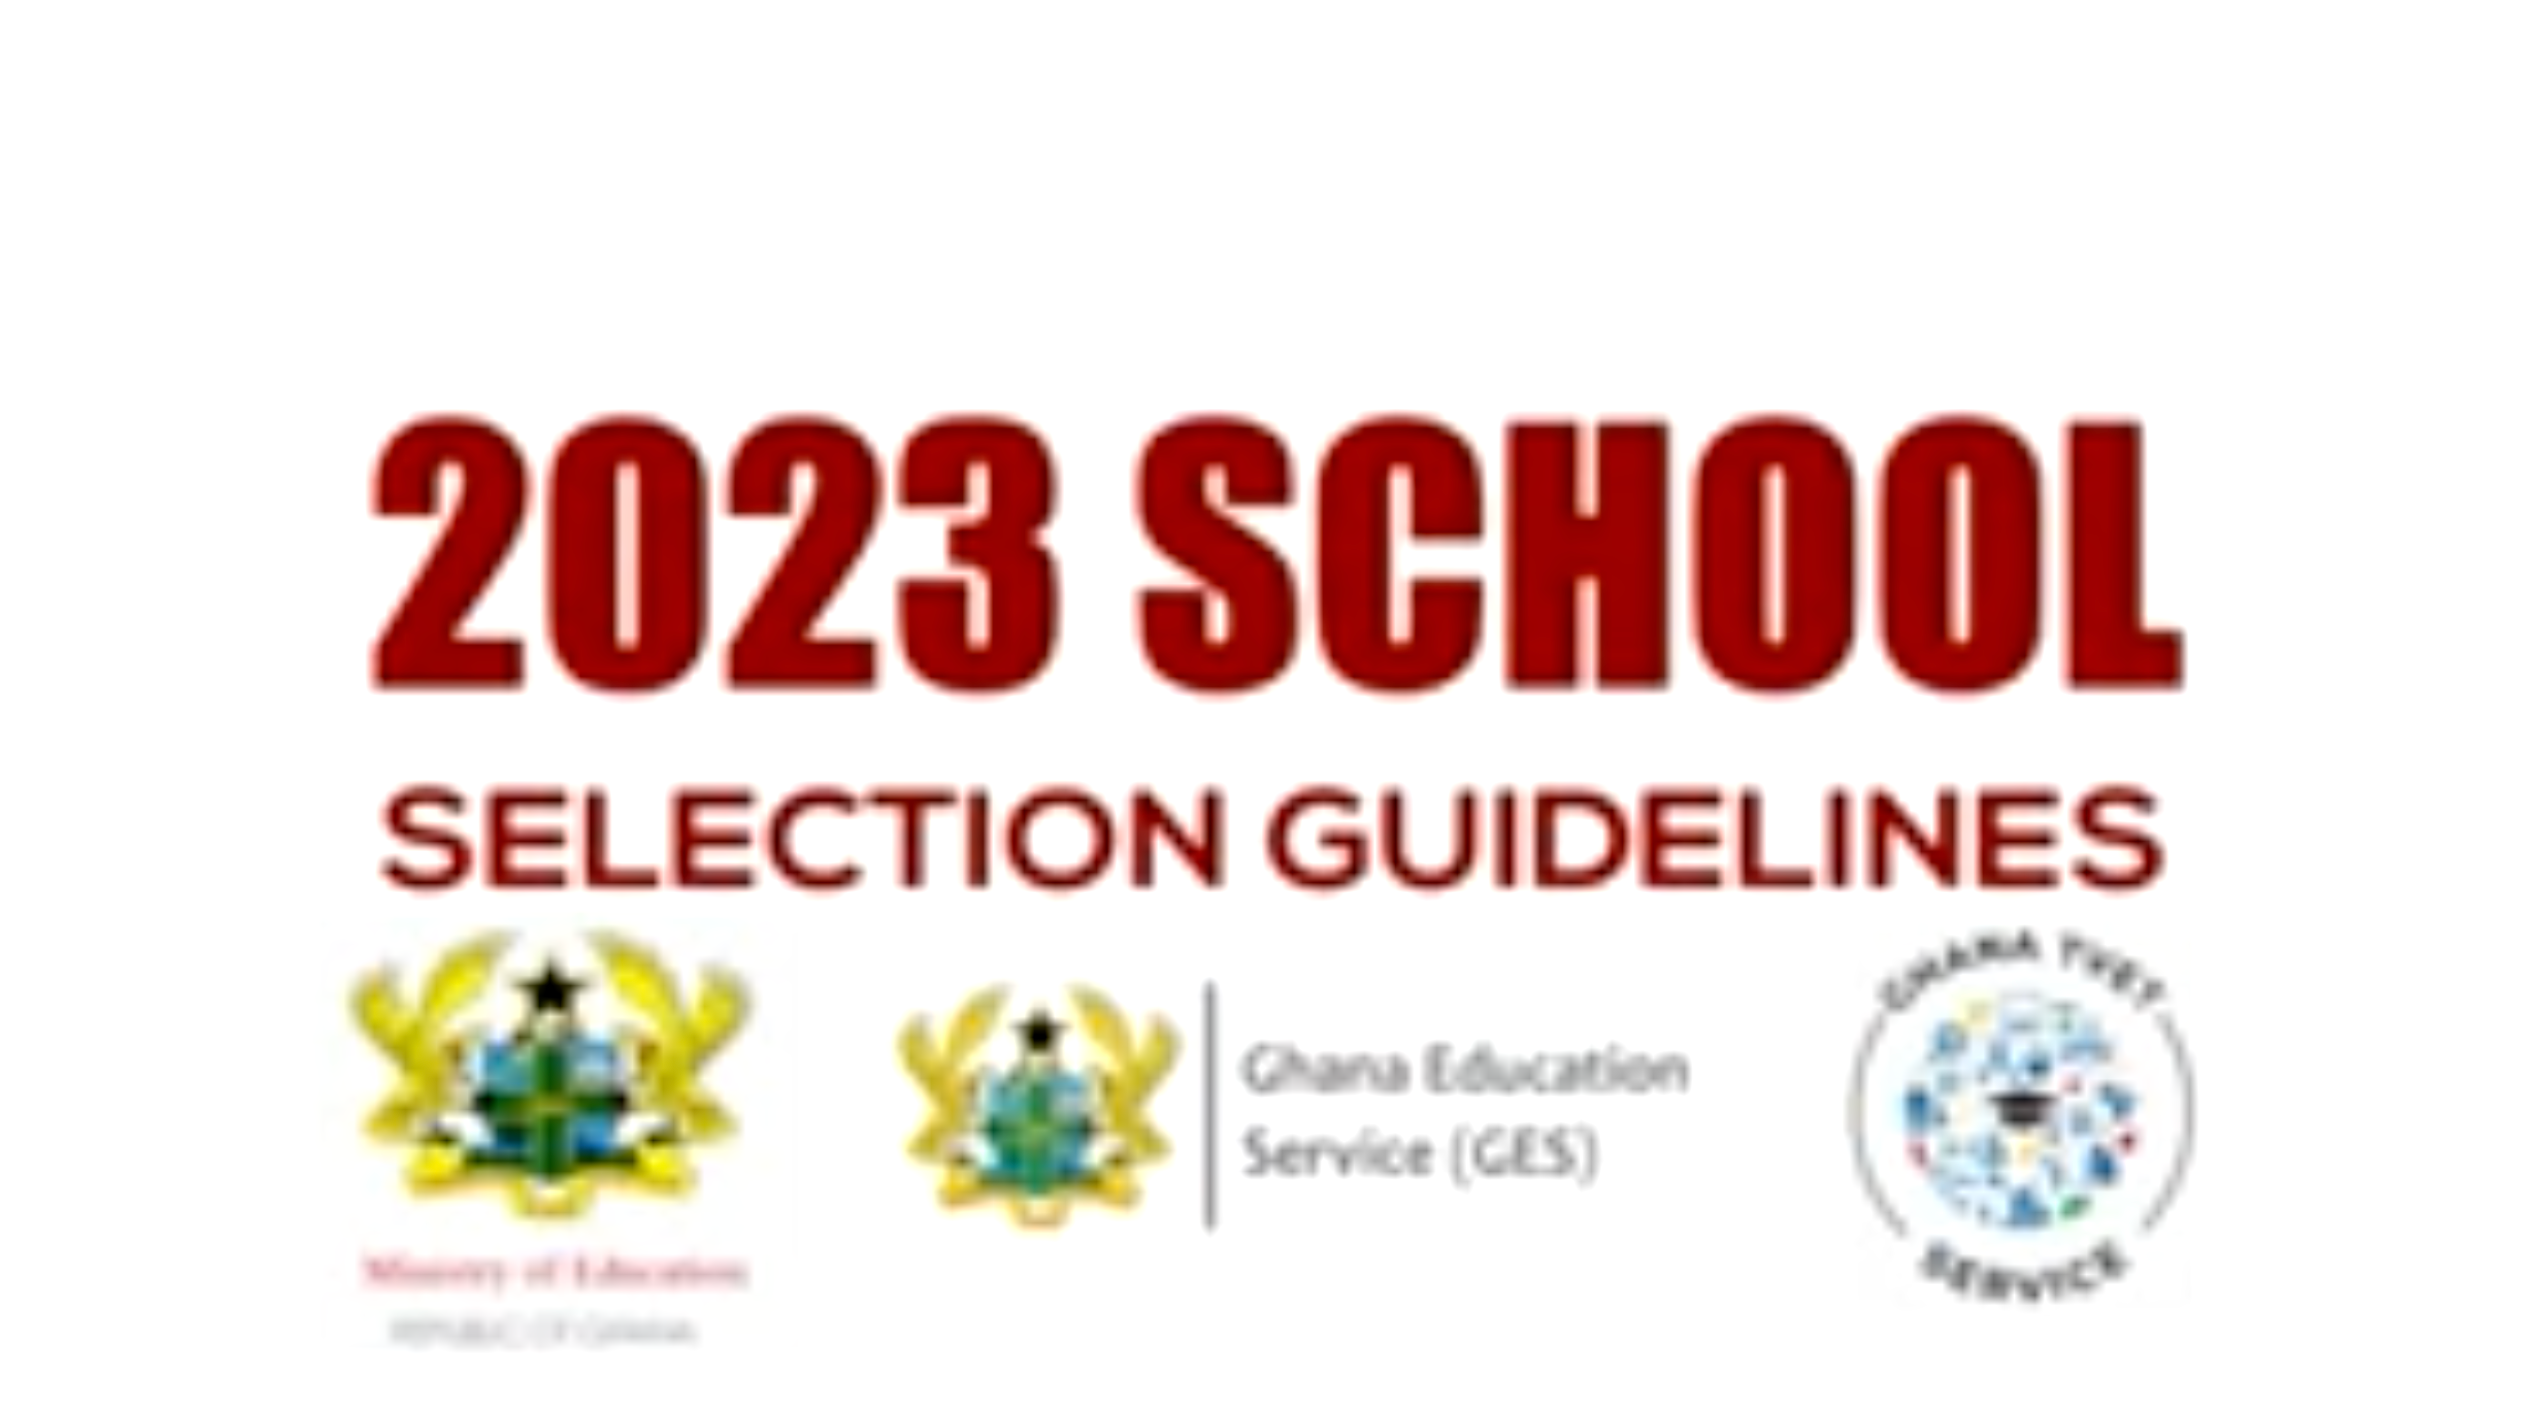 GES, MoE, and TVET New Update For the 2023 School Selection Process